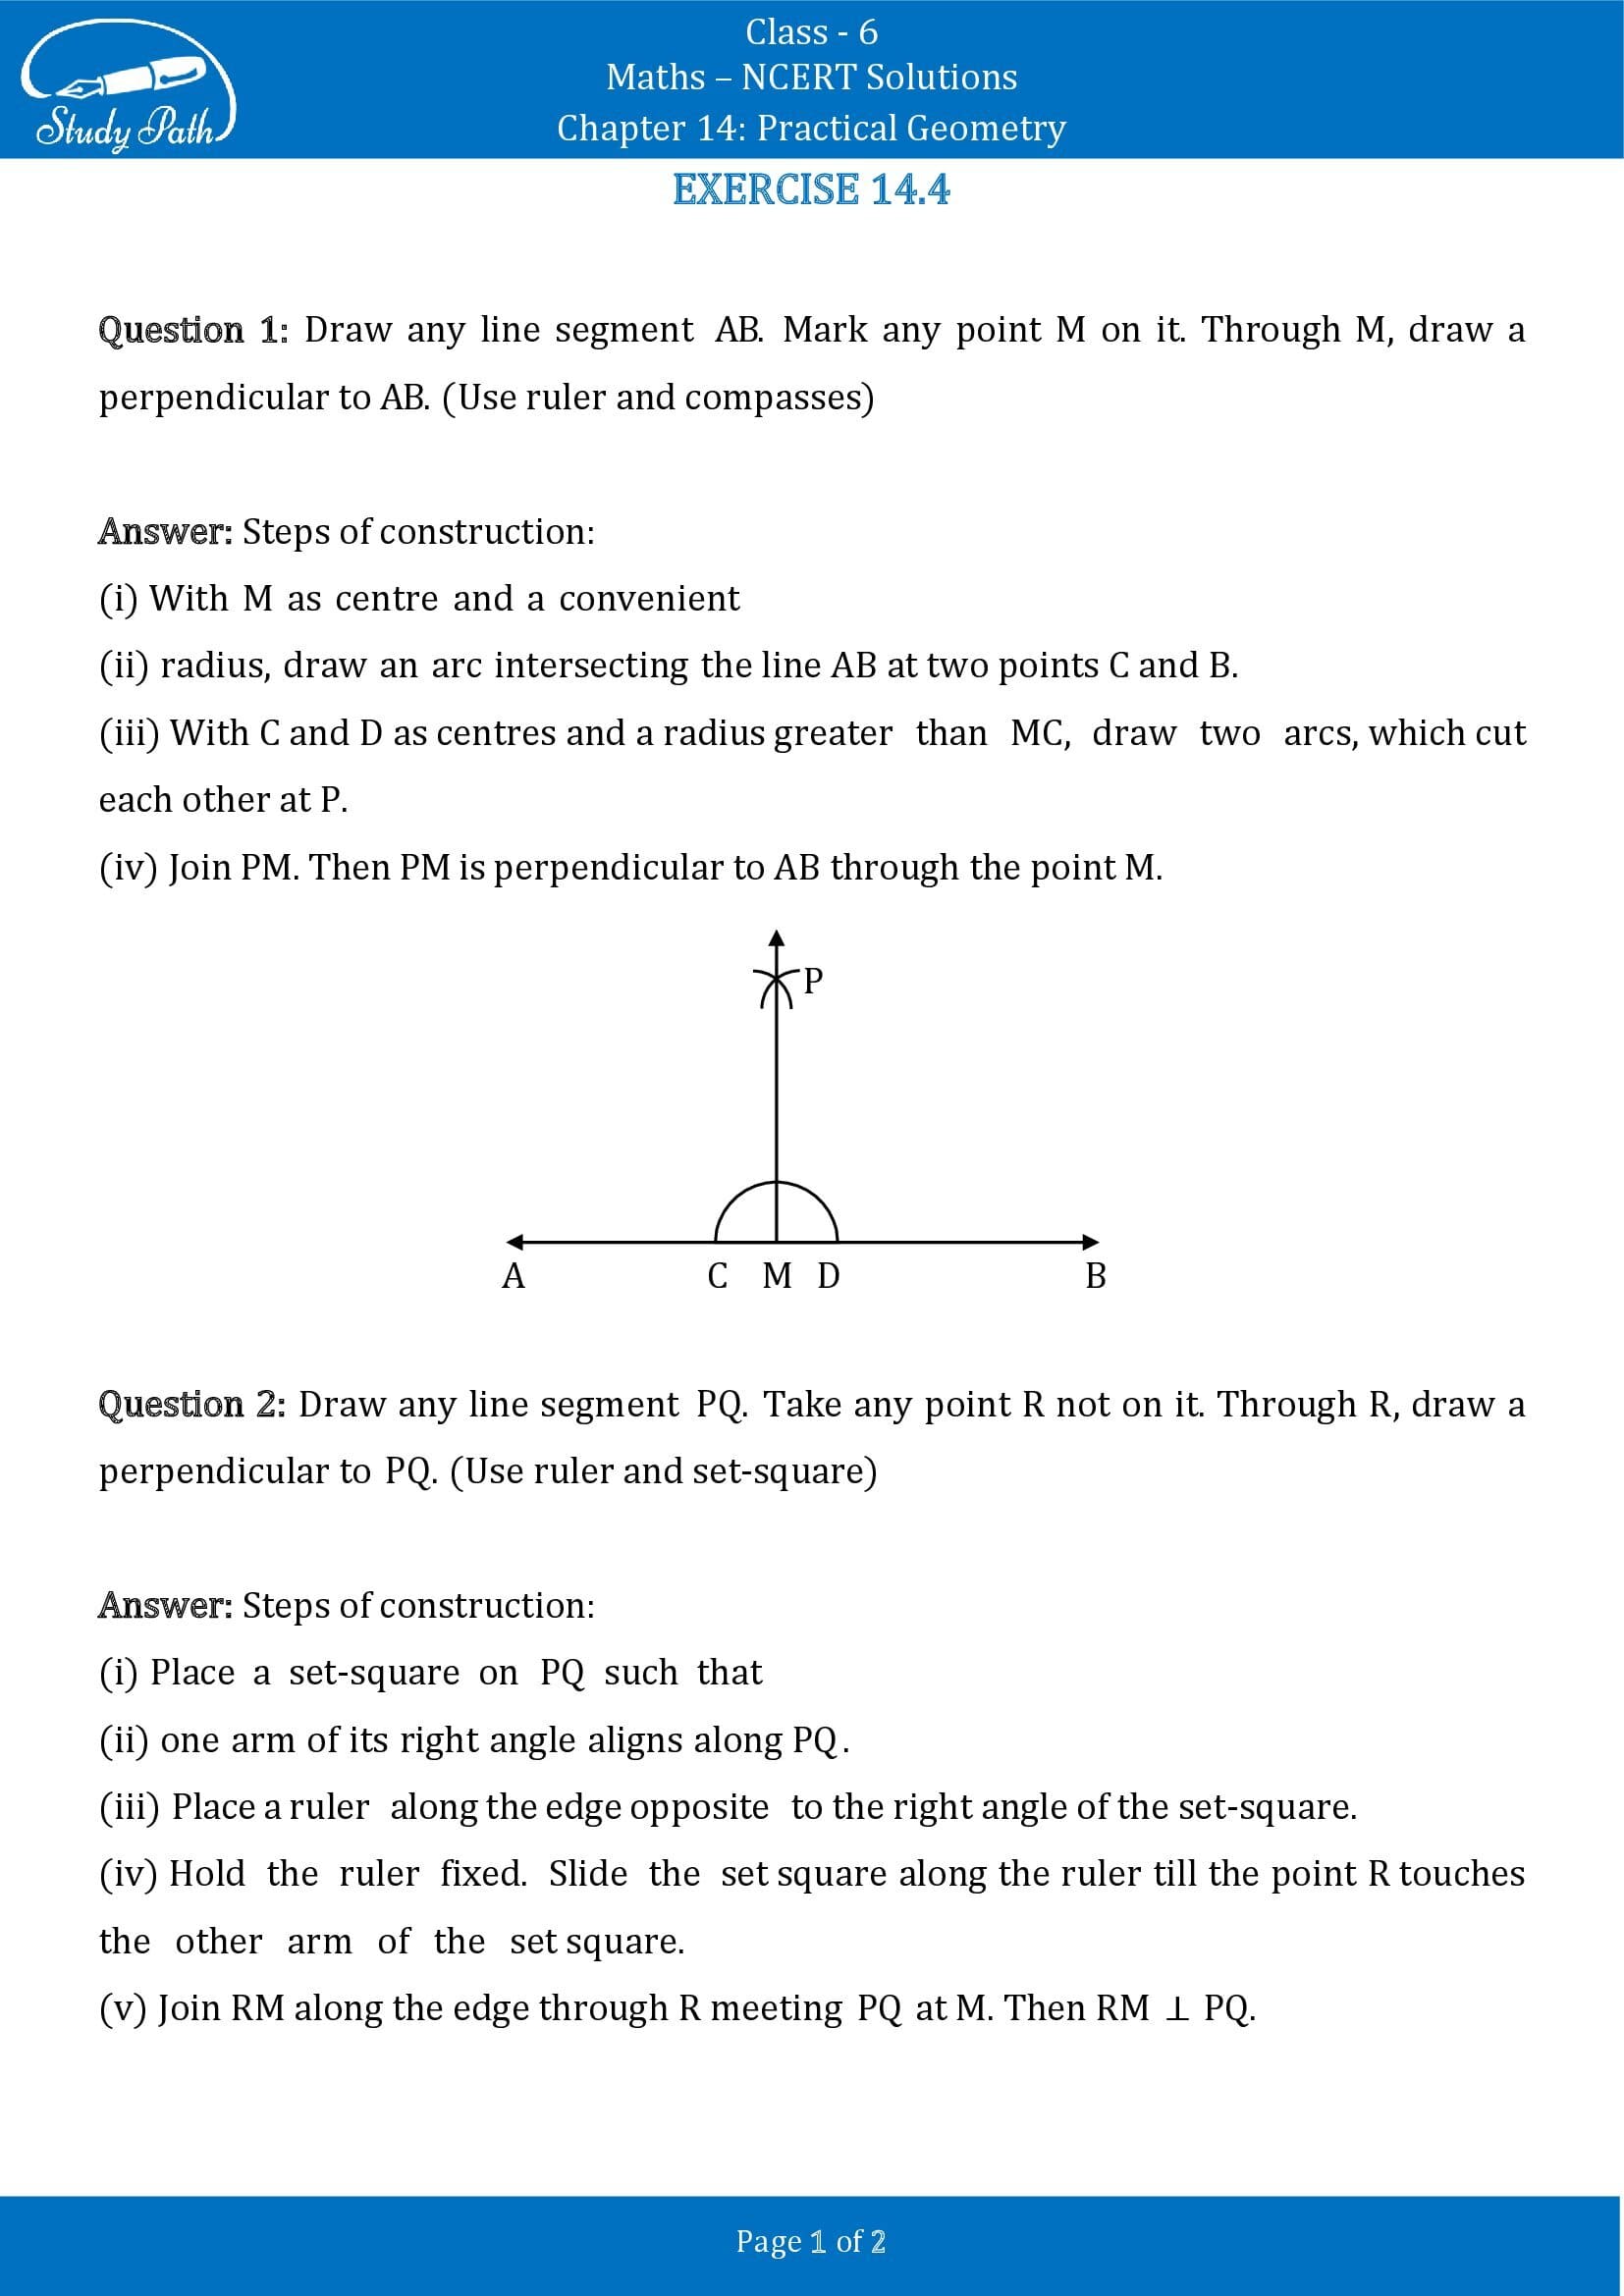 NCERT Solutions for Class 6 Maths Chapter 14 Practical Geometry Exercise 14.4 00001